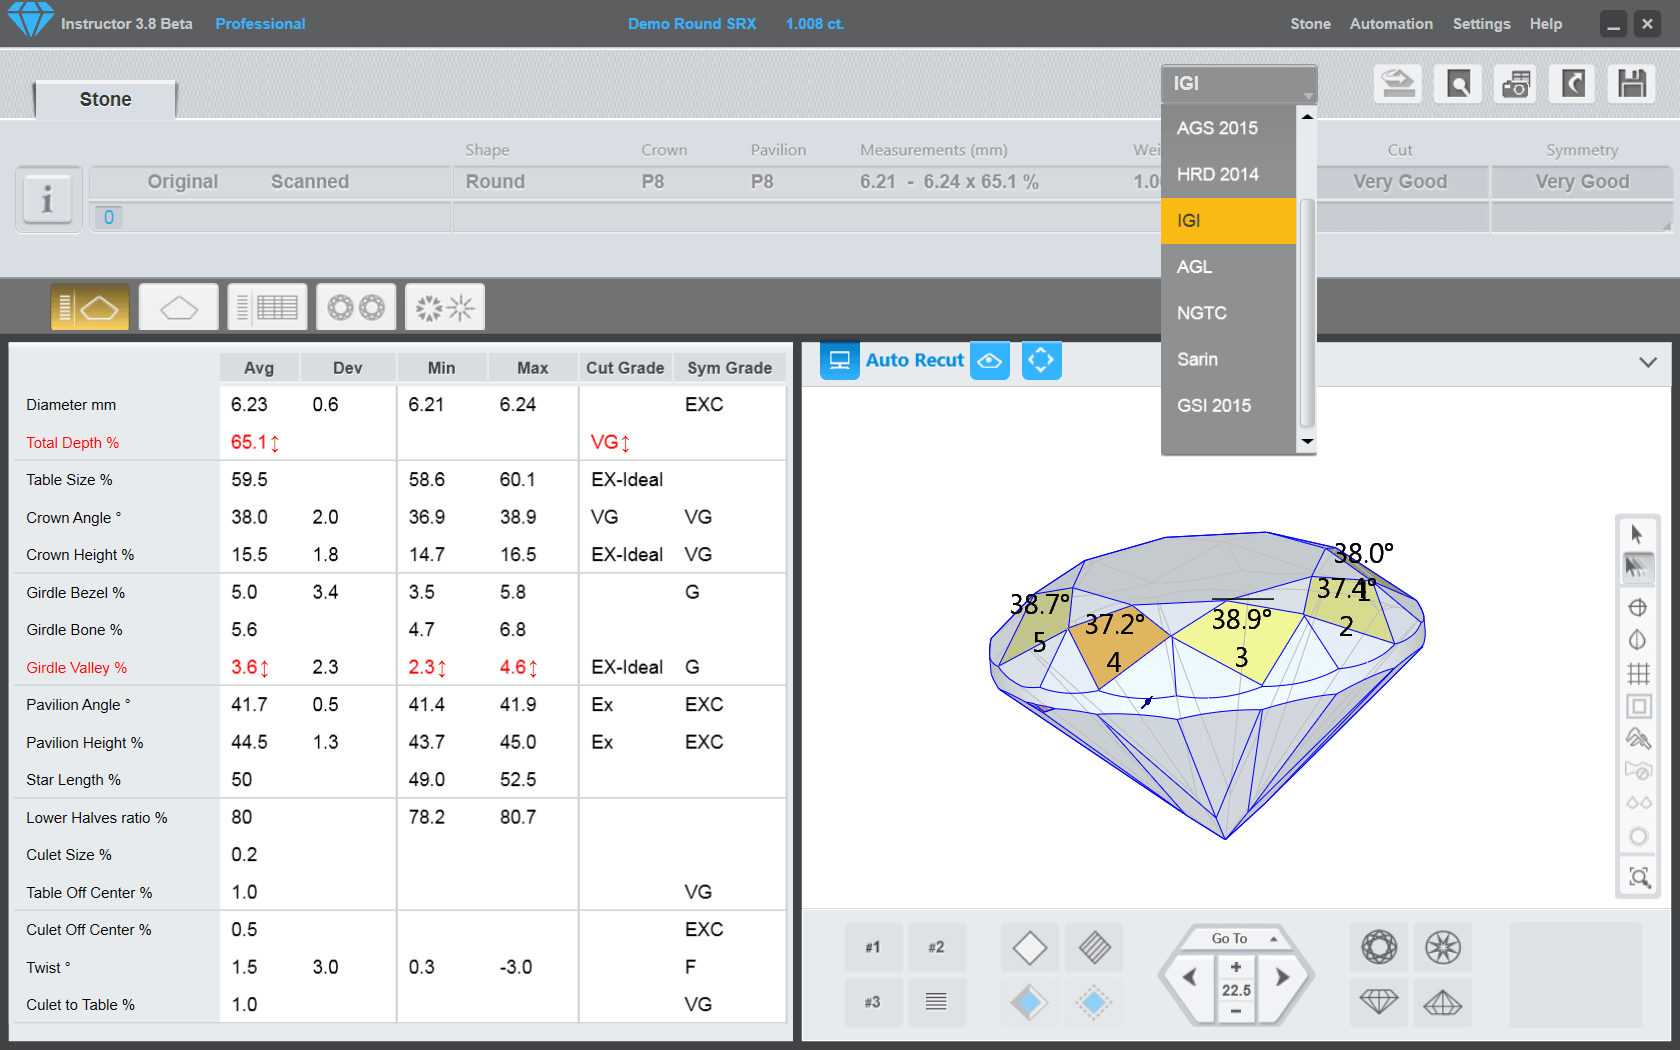 Fig 1. Gem labs parameters are integrated in Instructor software